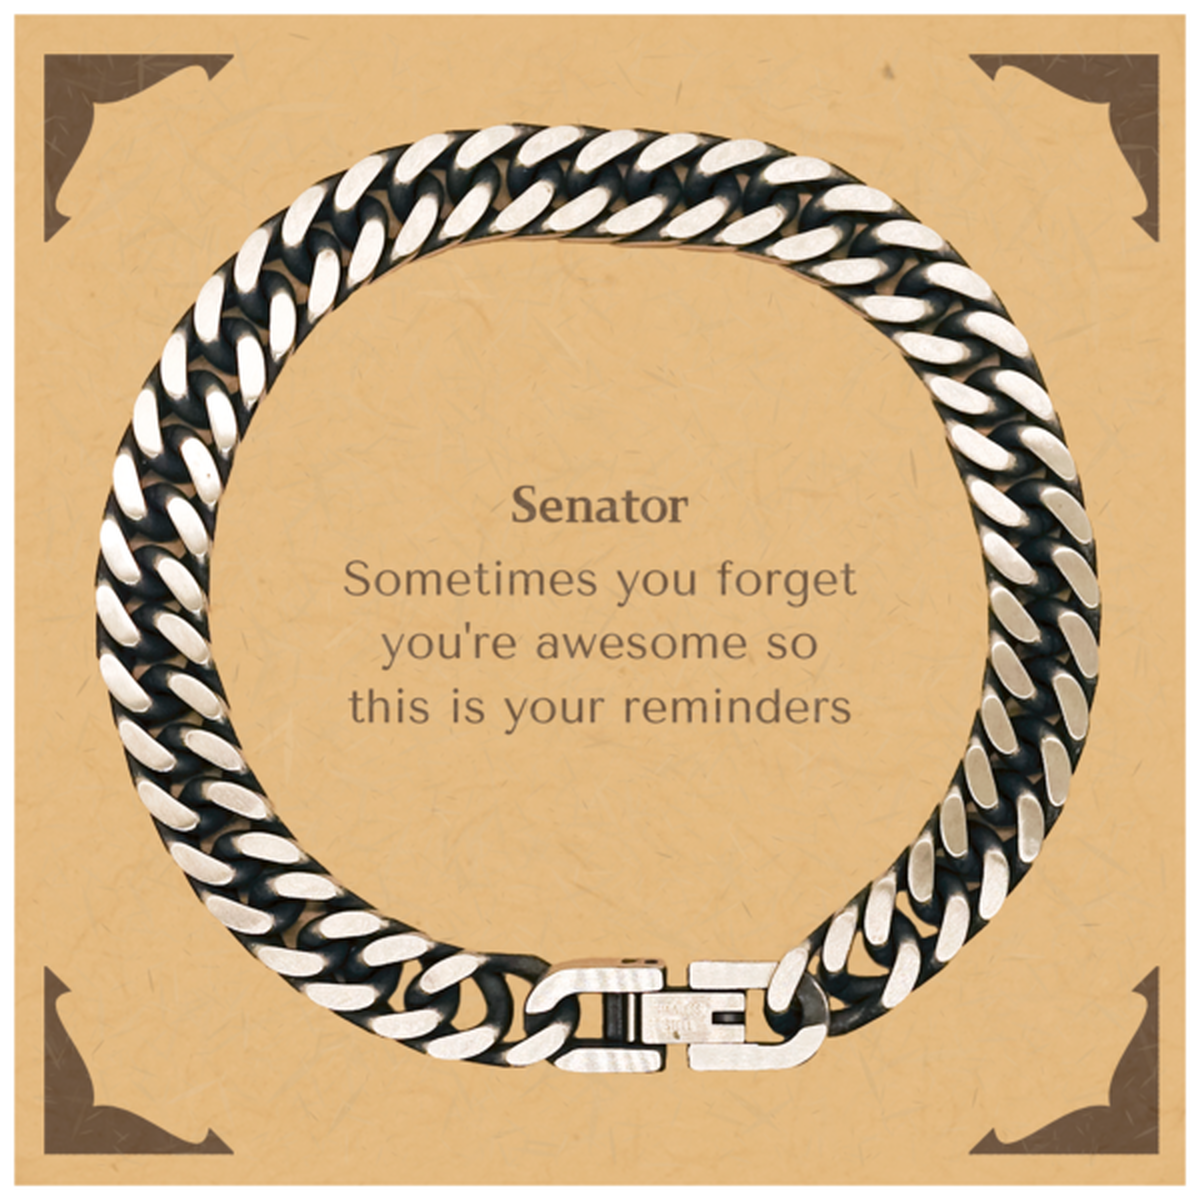 Sentimental Senator Cuban Link Chain Bracelet, Senator Sometimes you forget you're awesome so this is your reminders, Graduation Christmas Birthday Gifts for Senator, Men, Women, Coworkers